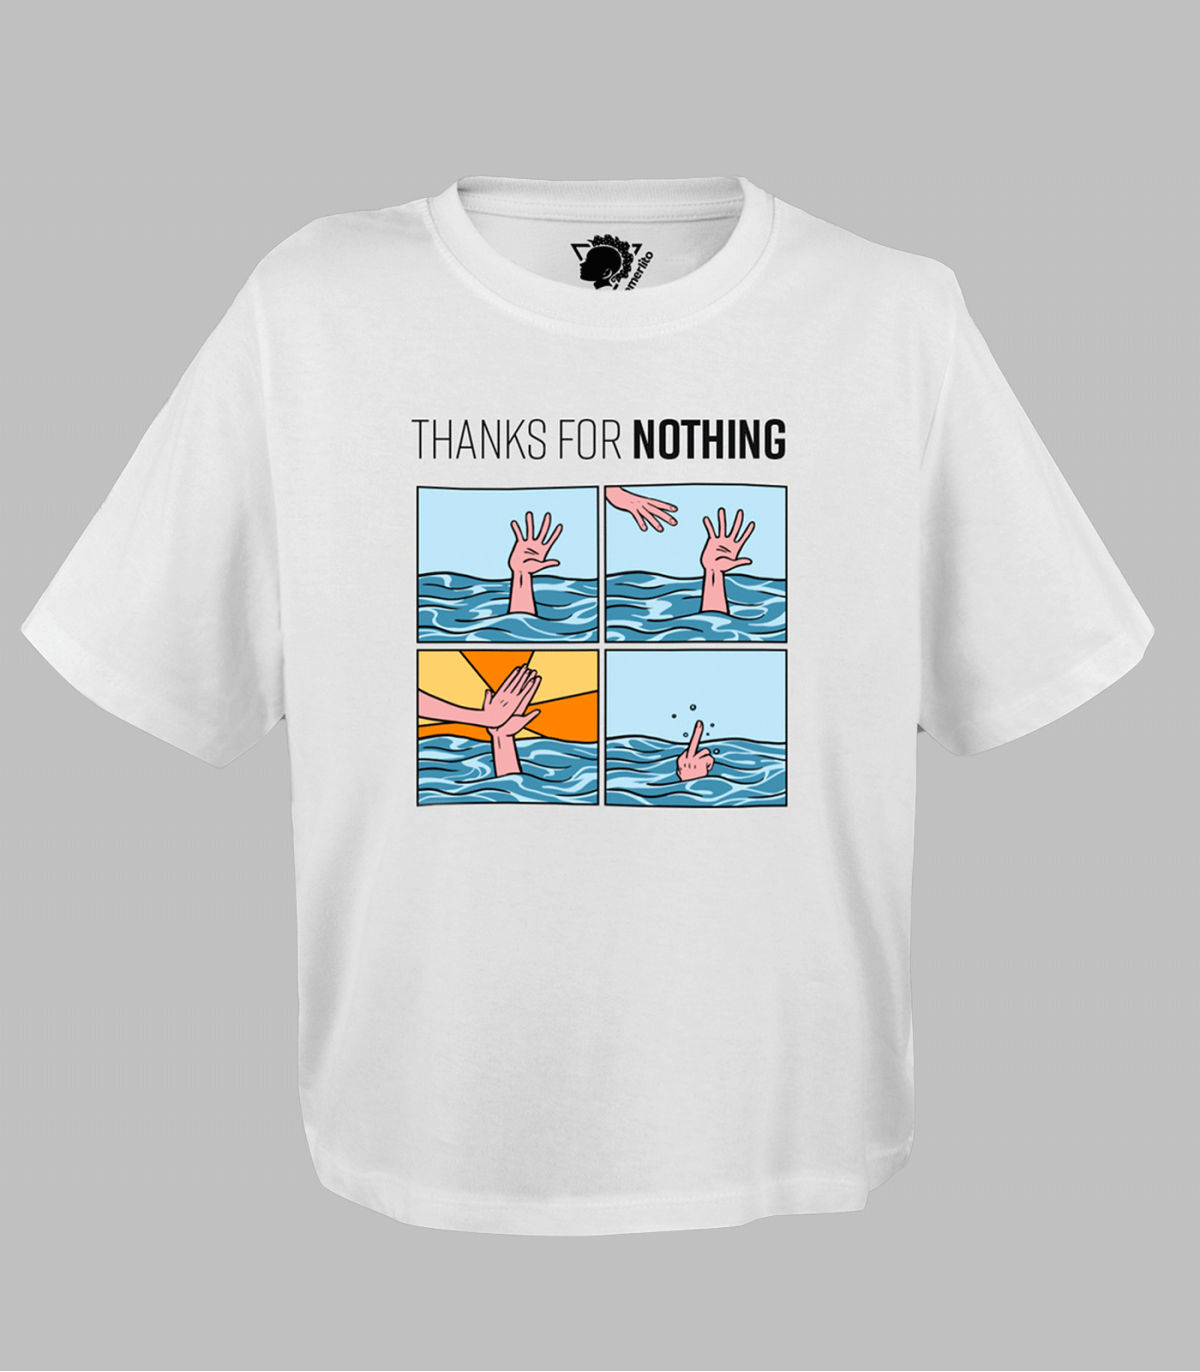 WHITE THANKS FOR NOTHING SHIRT